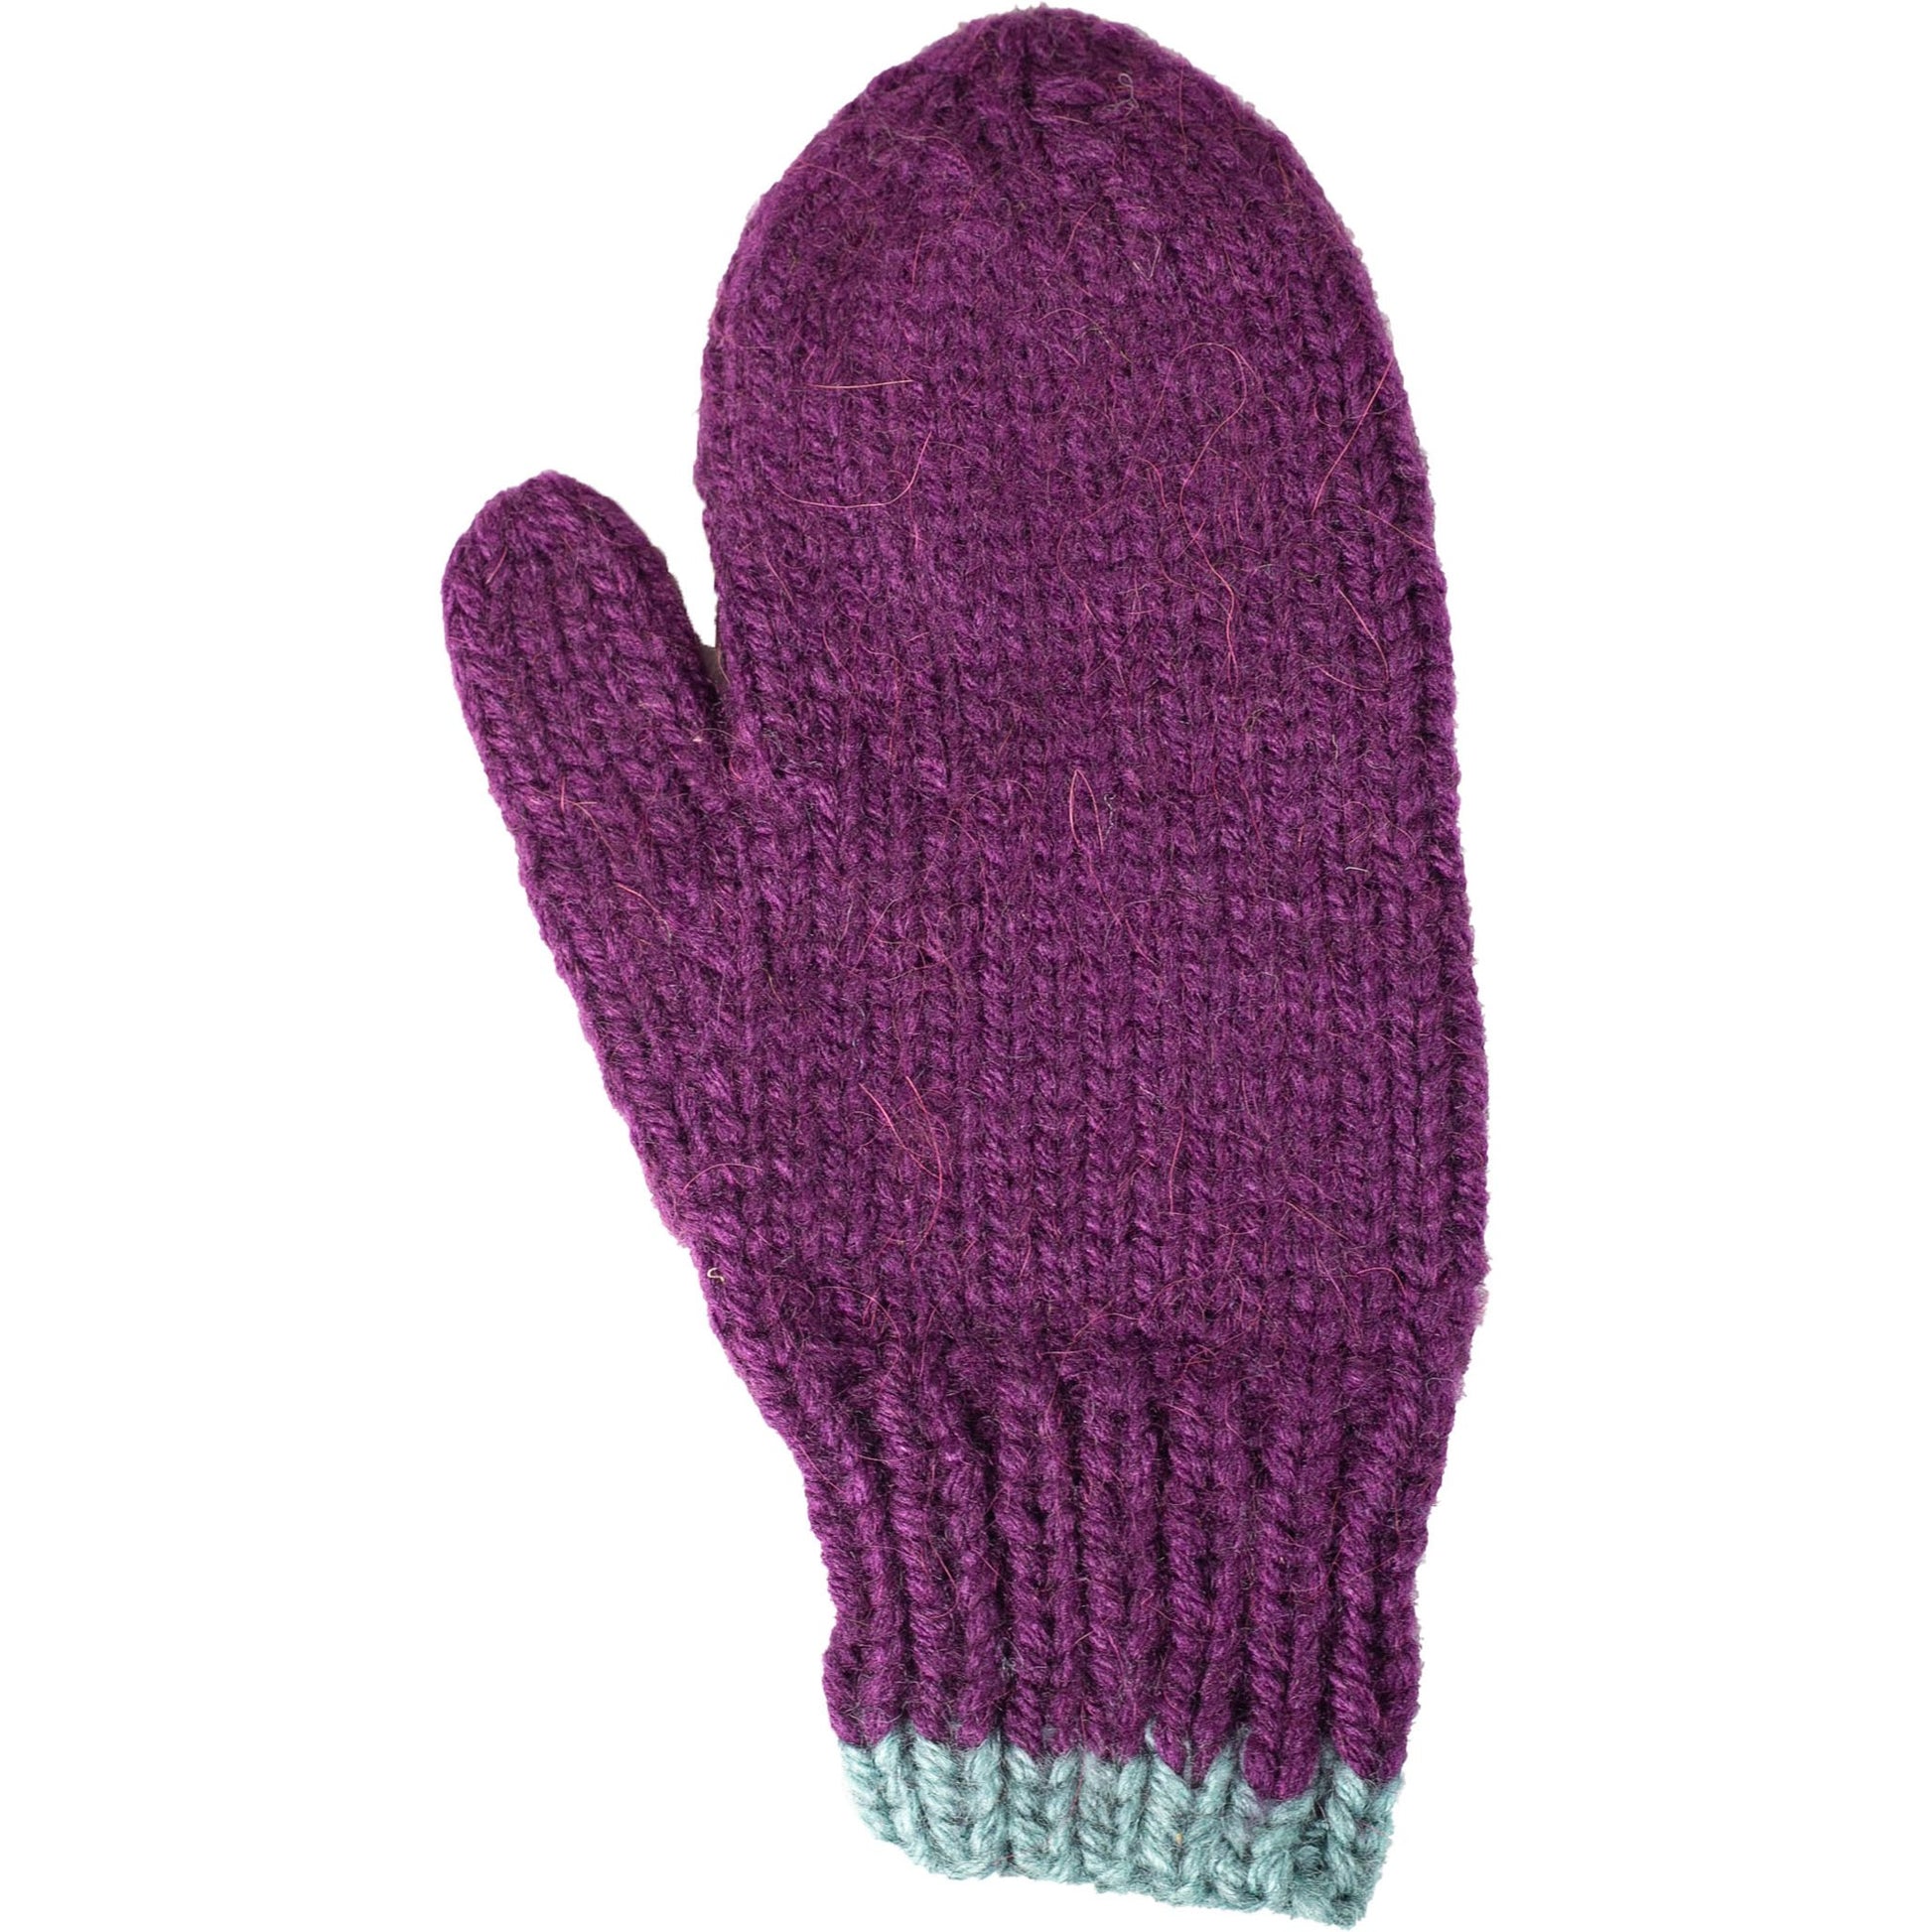 Cable Knit Mittens in Purple and Blue